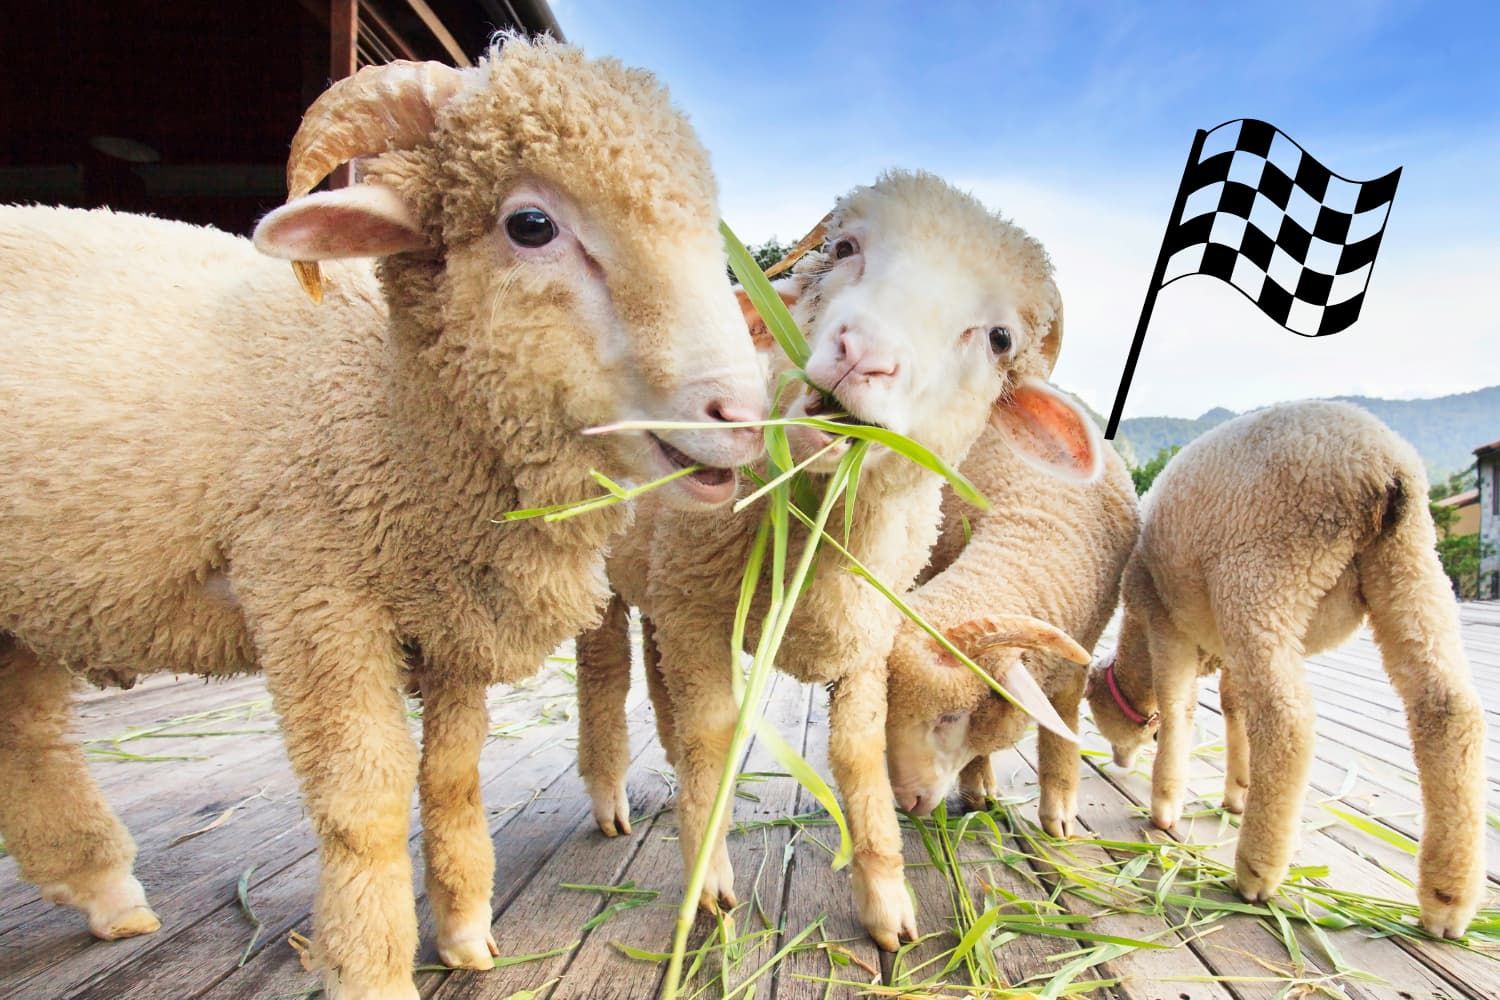 Game%20-%20OT%20Psalm%2023%20-%20The%20feed%20the%20sheep%20relay%20race-6bb58723 God's care